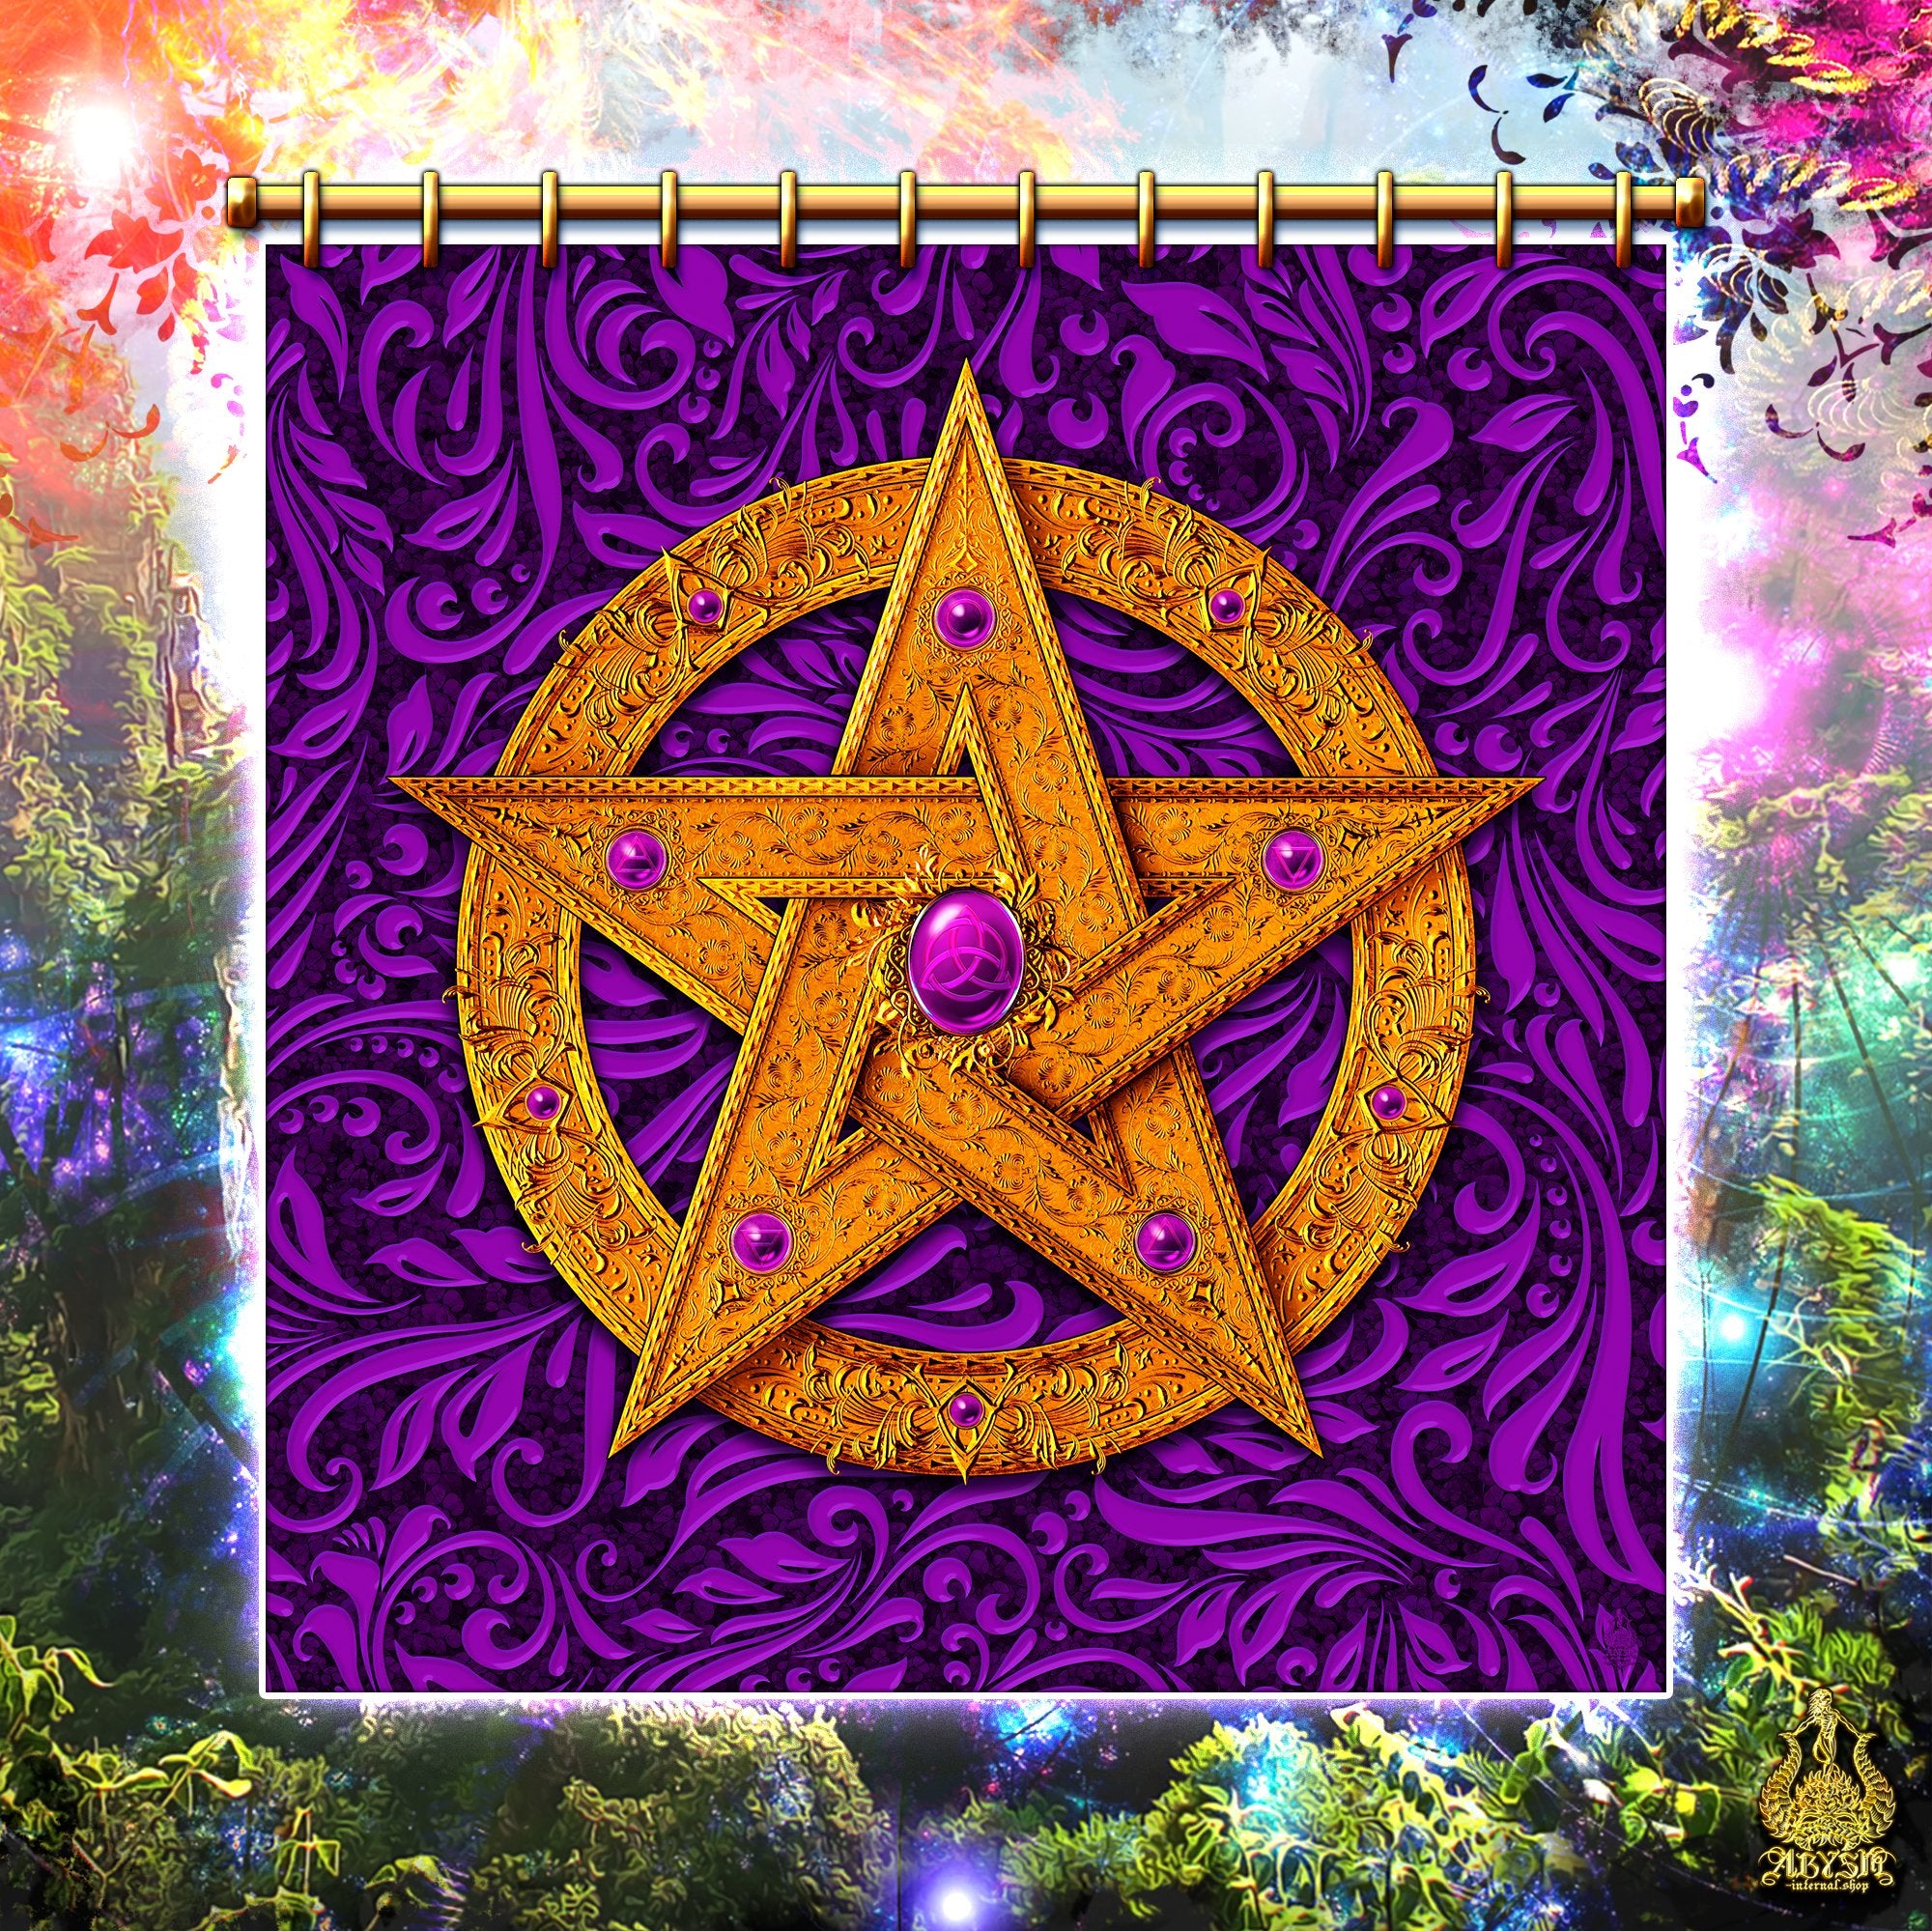 Gold Pentacle Shower Curtain, 71x74 inches, Witch Bathroom Decor, Wicca Art, Eclectic and Funky Home Art - Star, 4 Colours - Abysm Internal